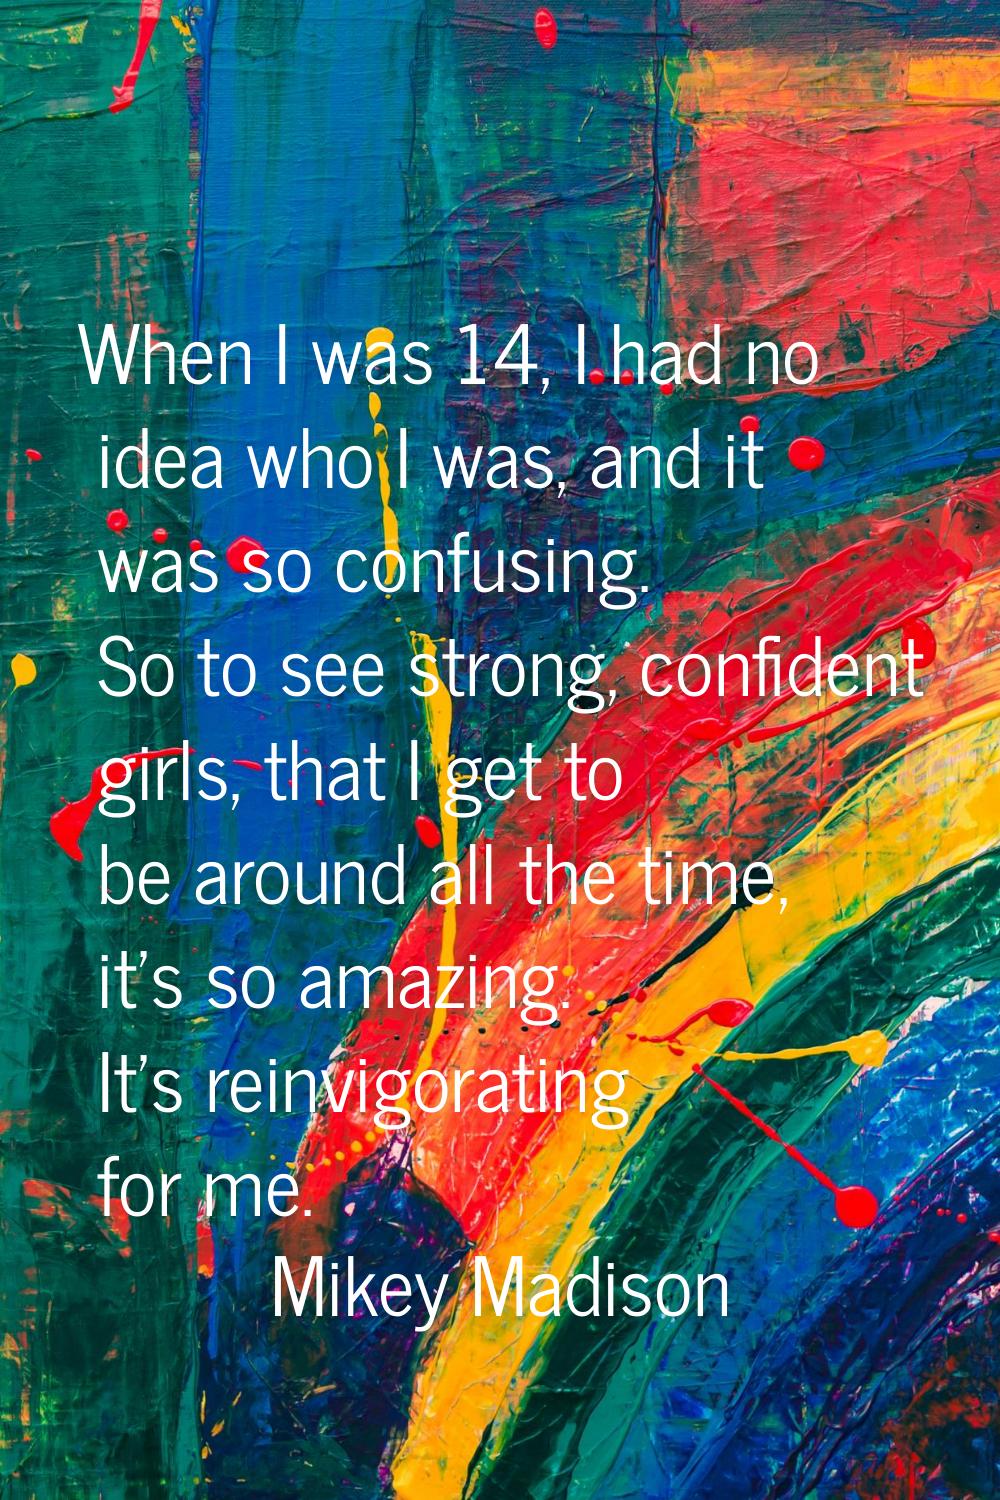 When I was 14, I had no idea who I was, and it was so confusing. So to see strong, confident girls,